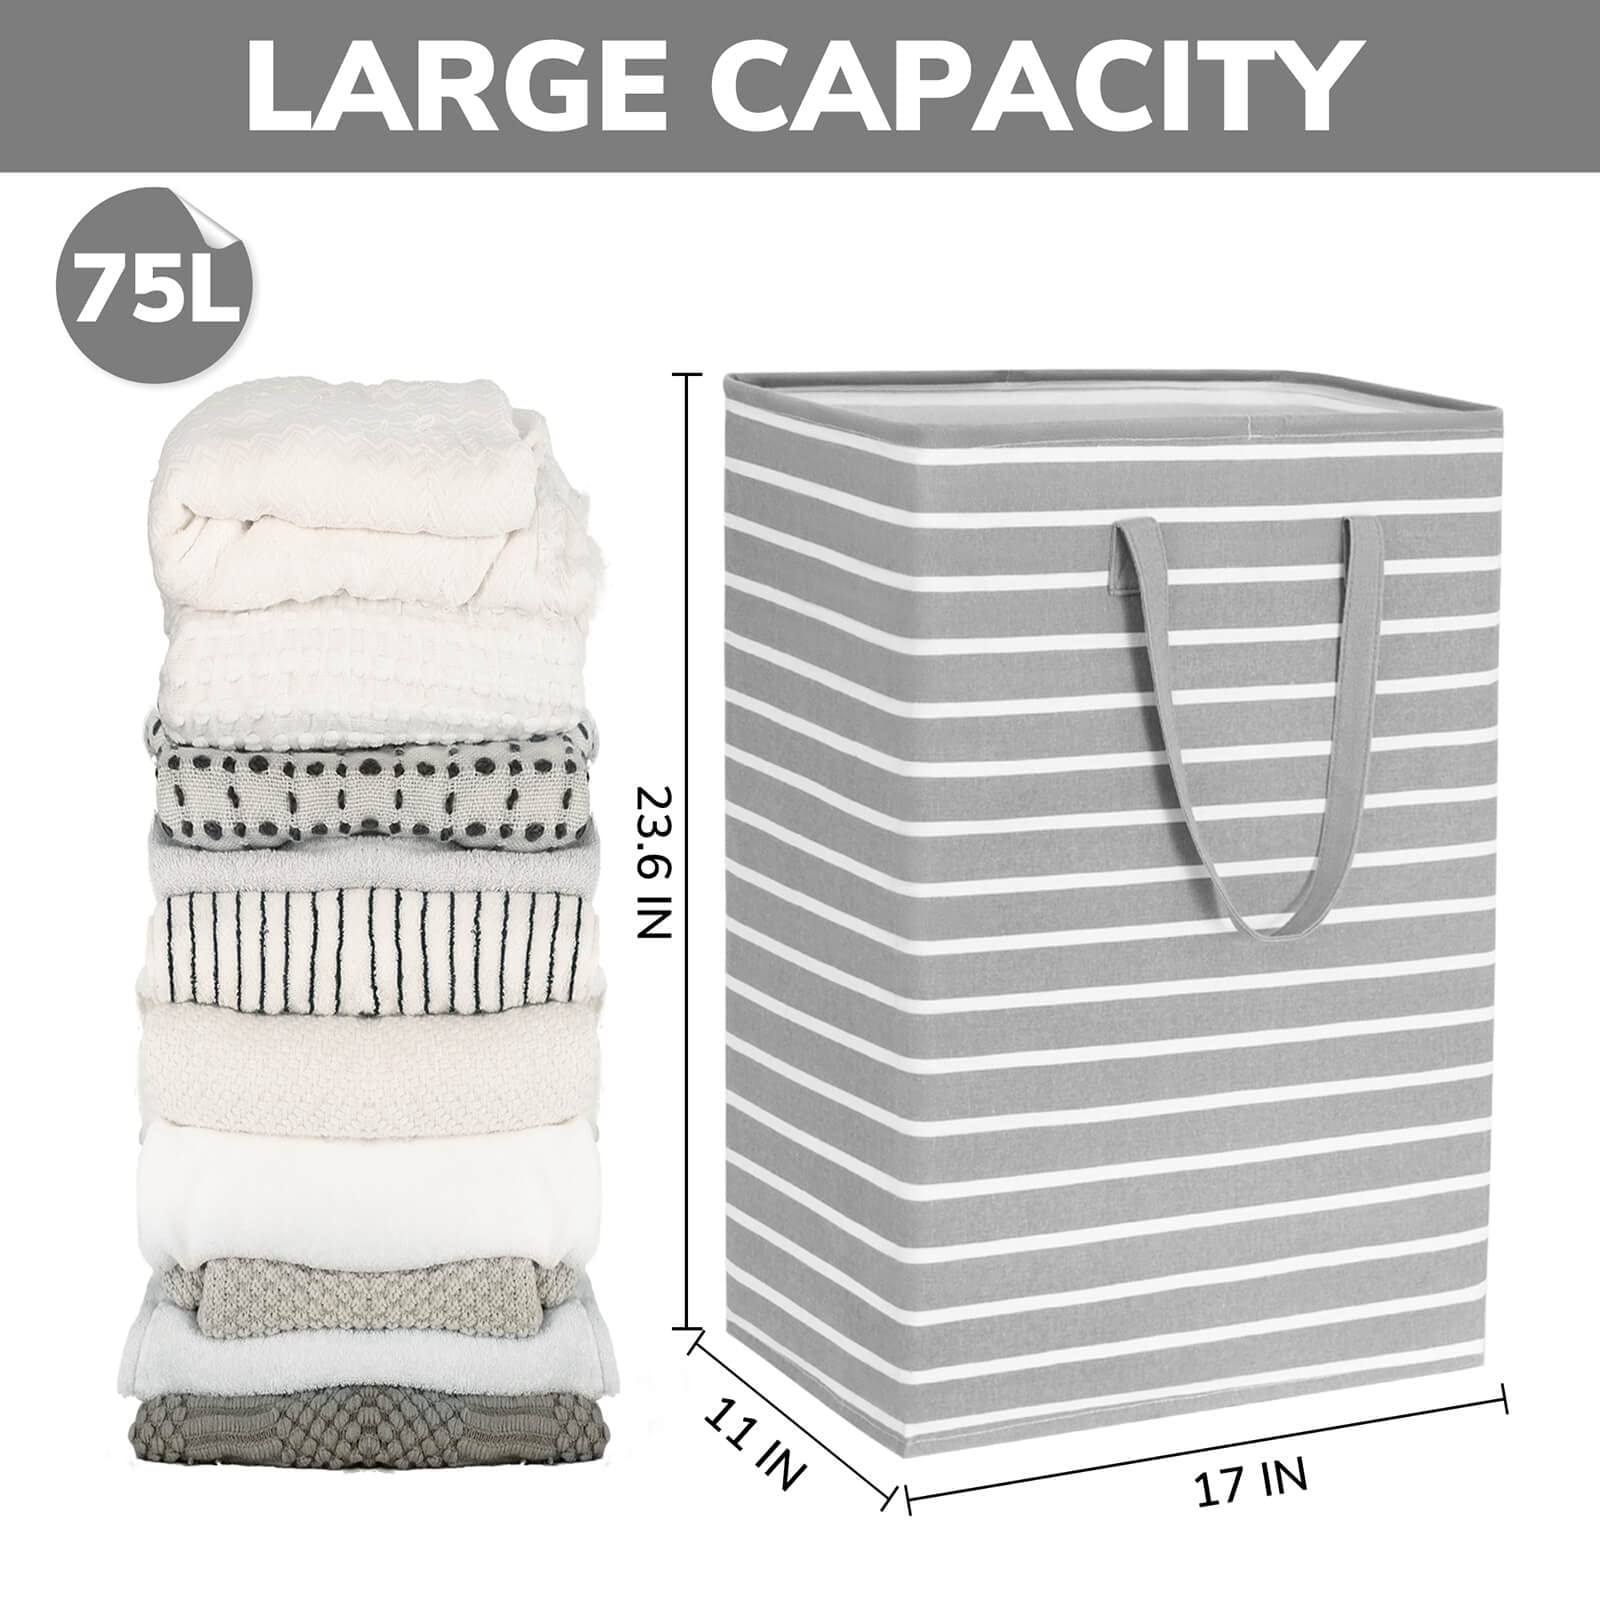 Goodpick Laundry Hamper Large Collapsible Laundry Baskets for Towels Bedding Dirty Clothes Hampers for Laundry Bin Toy Storage Baskets for Organizing Blankets in Bedroom Student Dorm, 75L 2 Pack, Grey